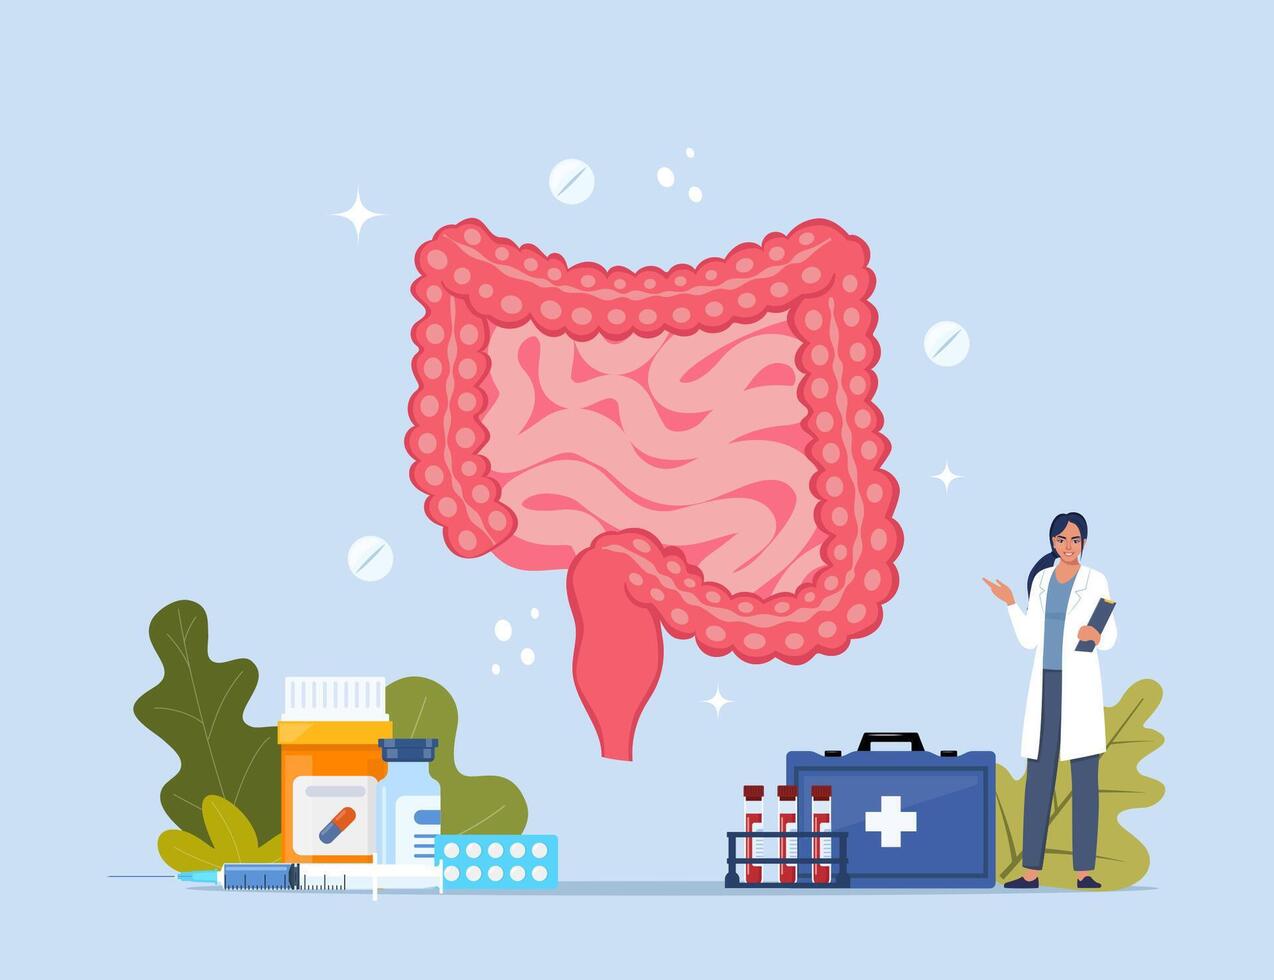 Human intestine. Inner organs disease treatment. Modern design concept with tiny doctor character, medical drugs, equipment, analysis. Illustration. vector